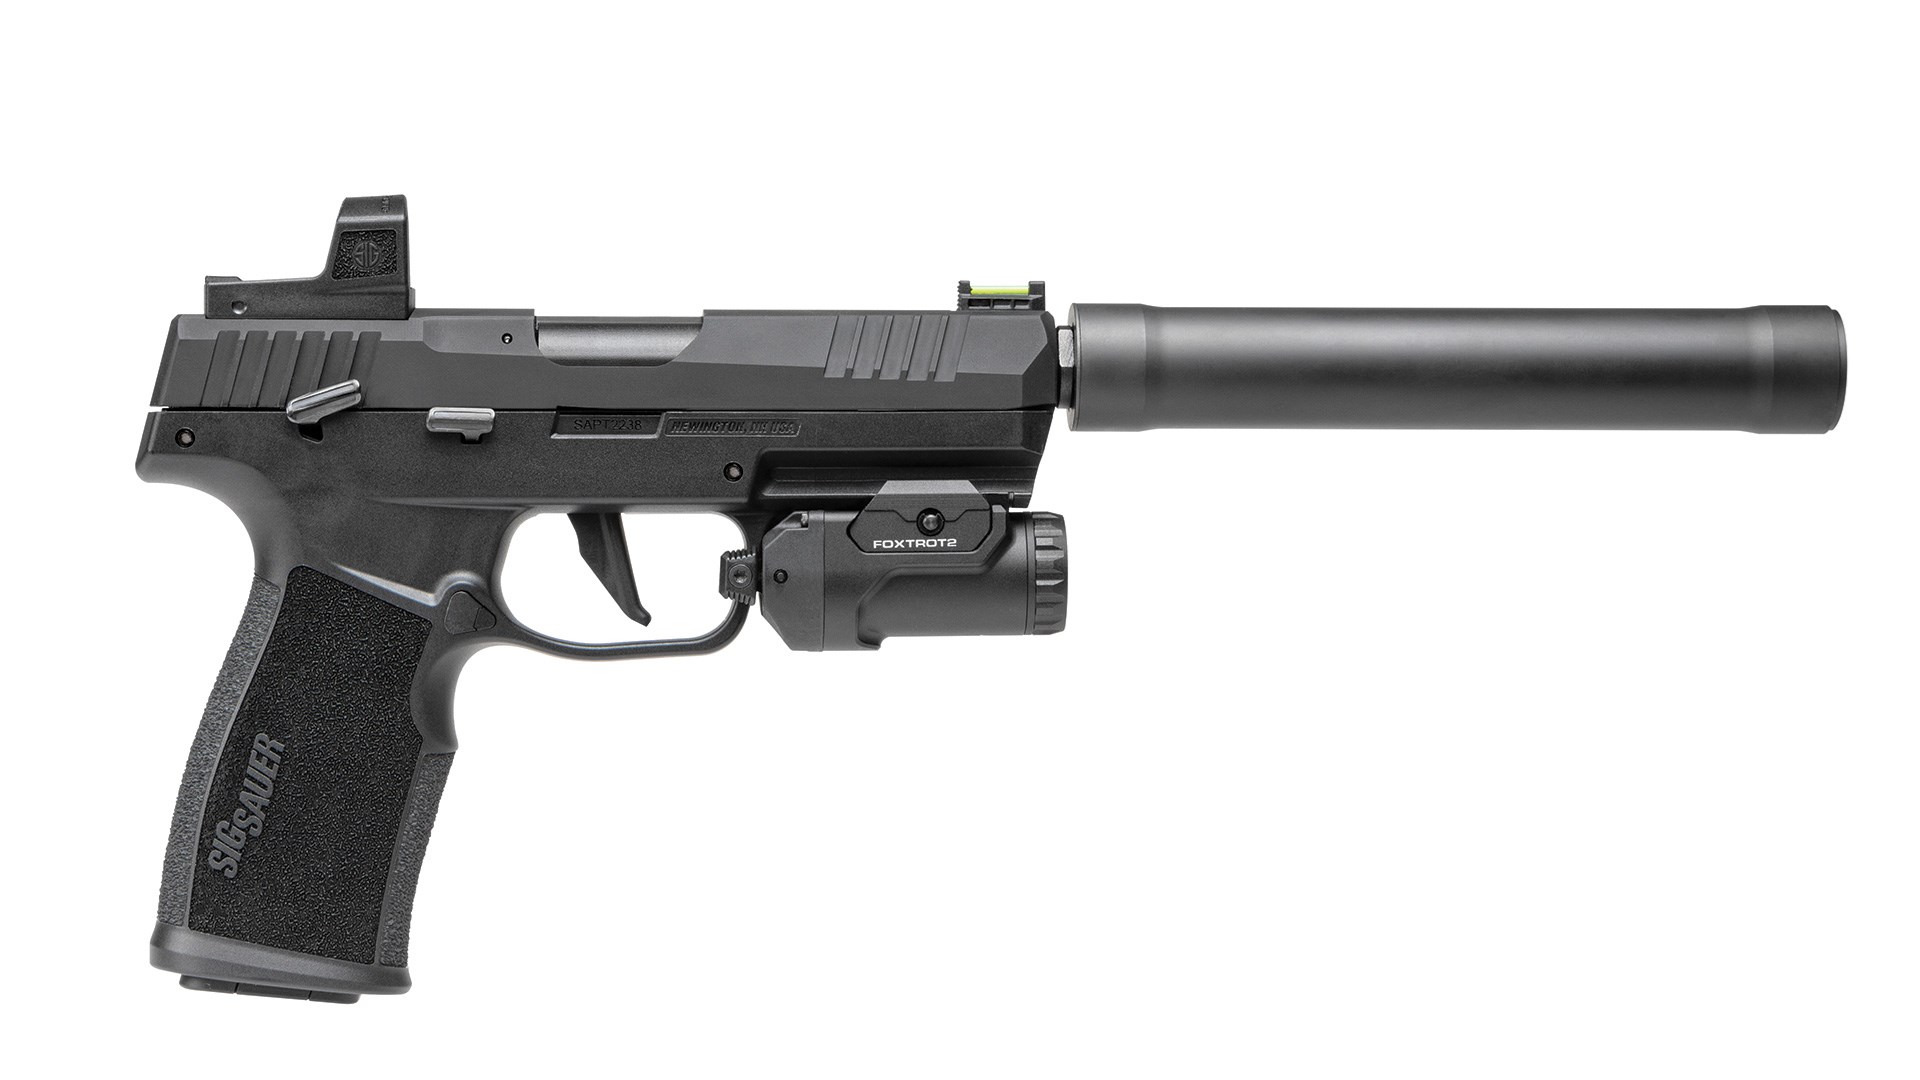 SIG P322 pistol with red dot, light and suppressor